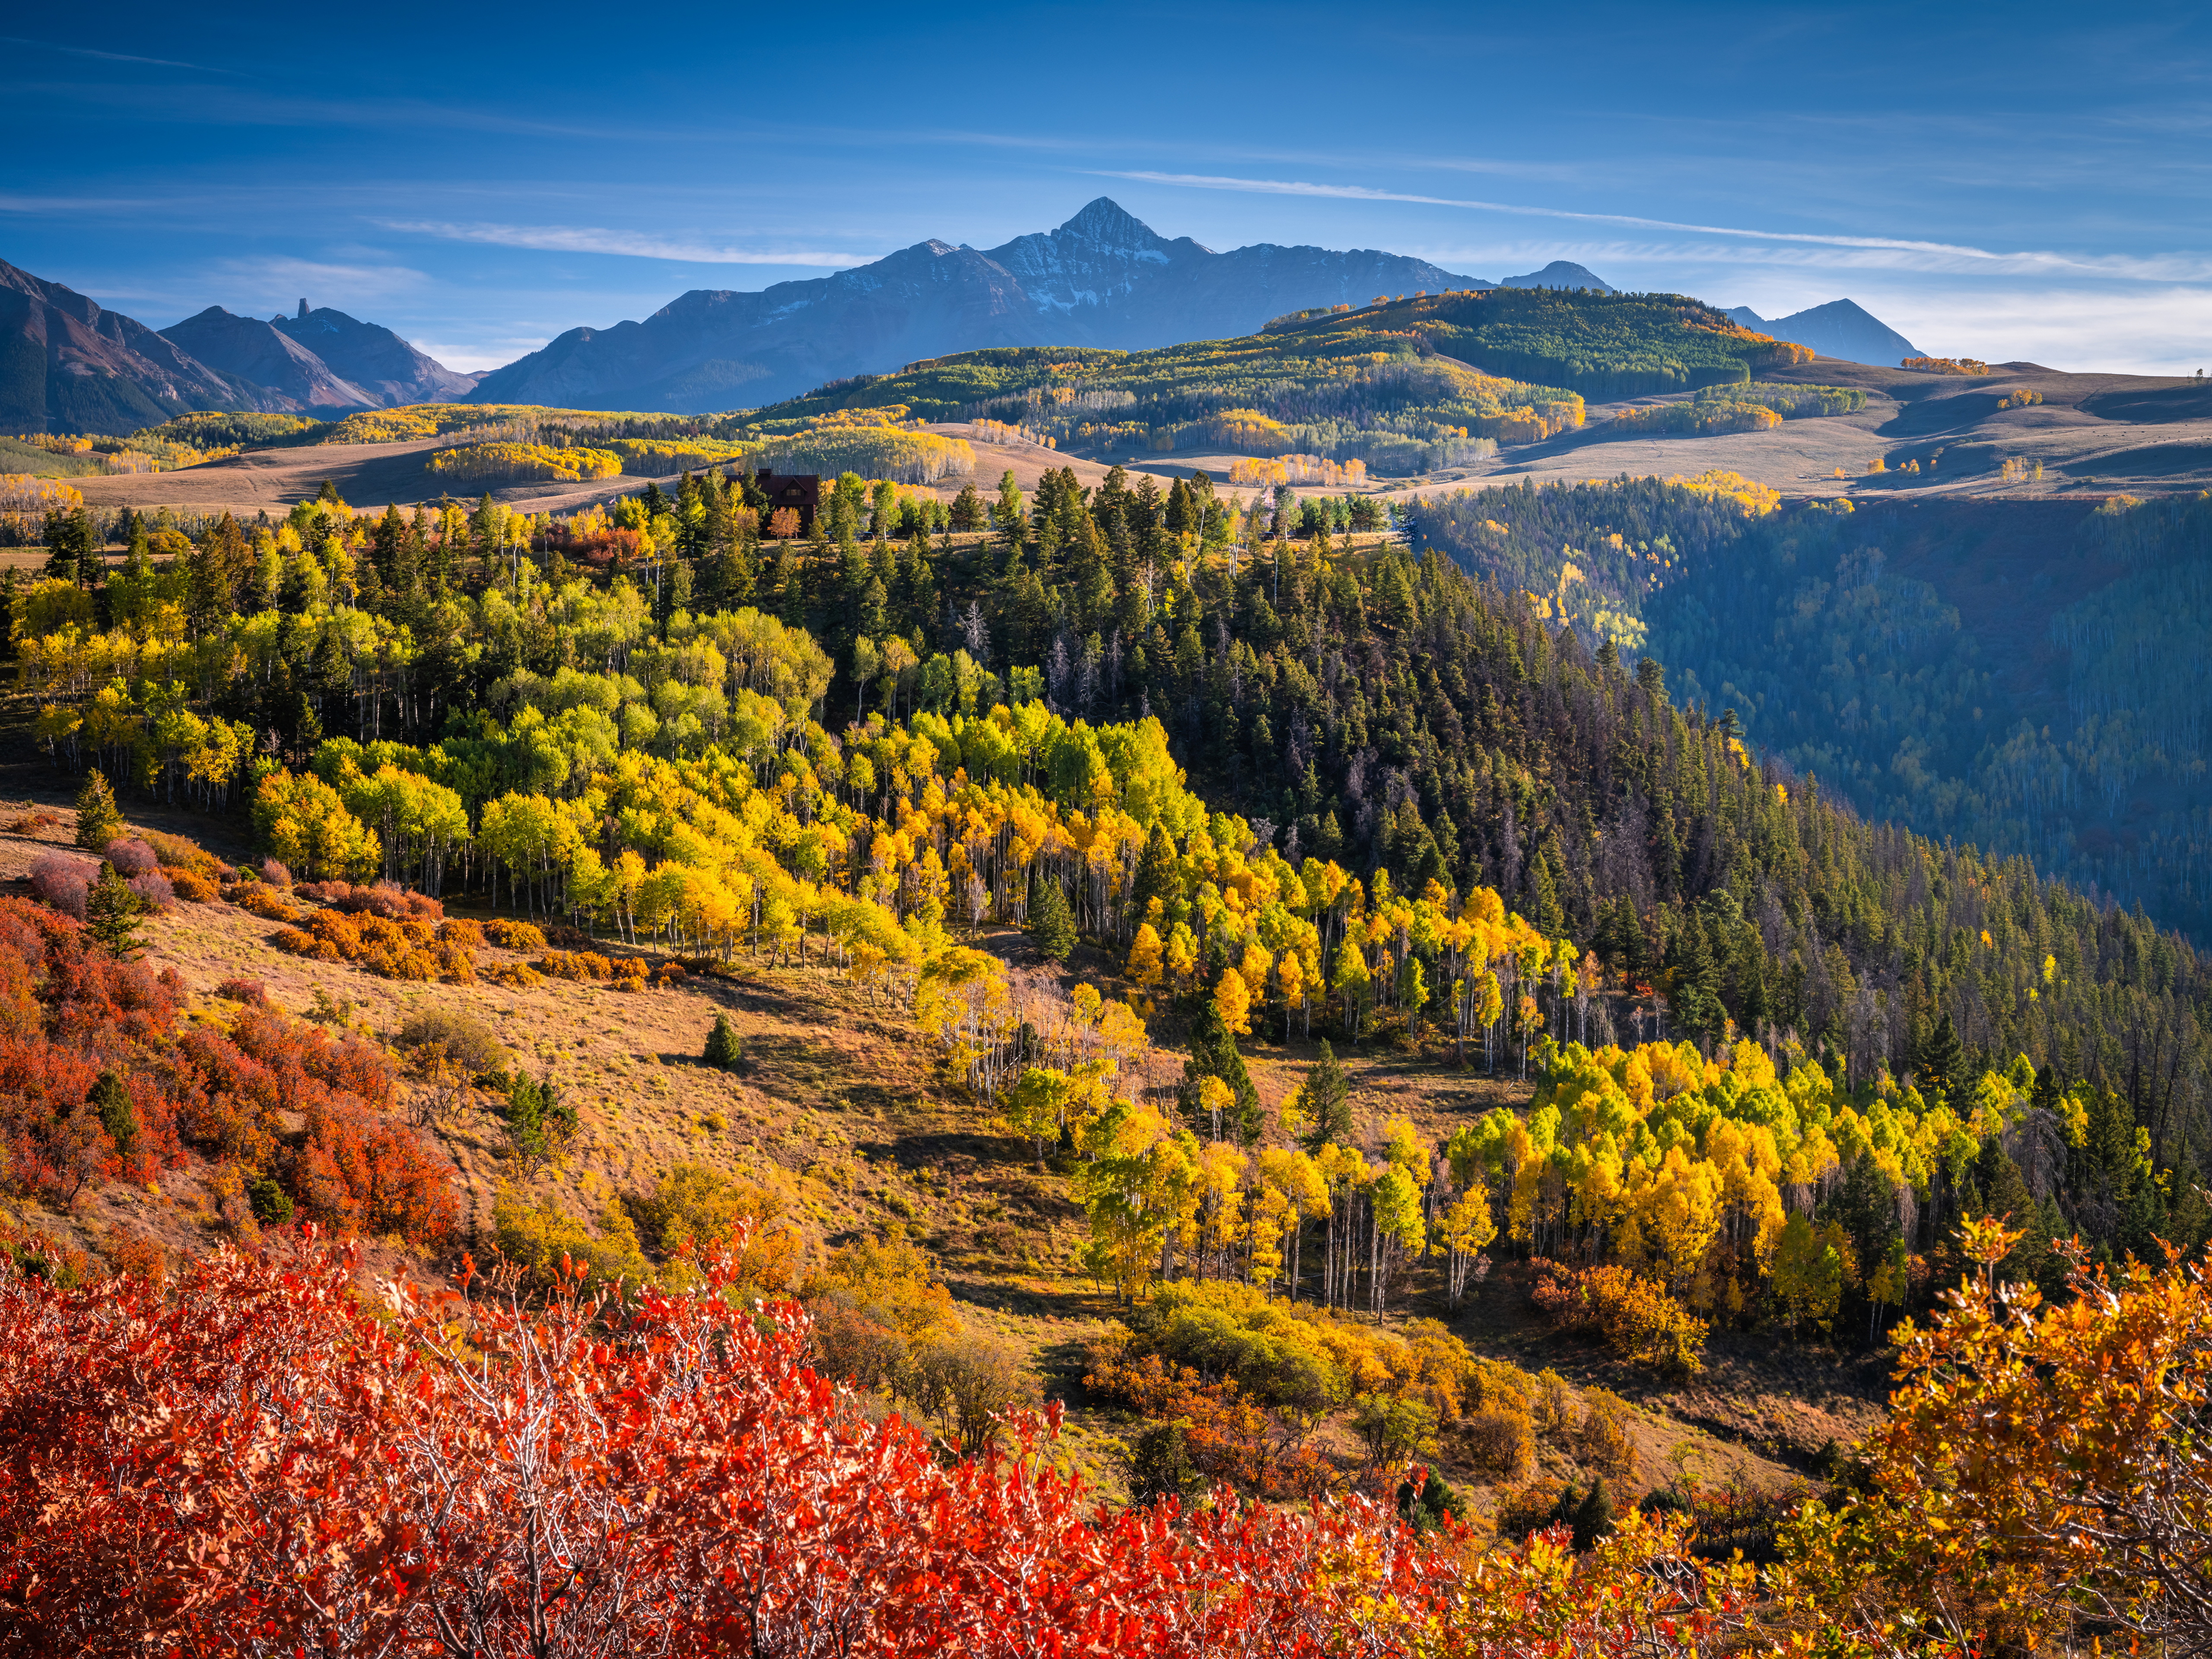 Wallpapers nature autumn scenery mountains on the desktop